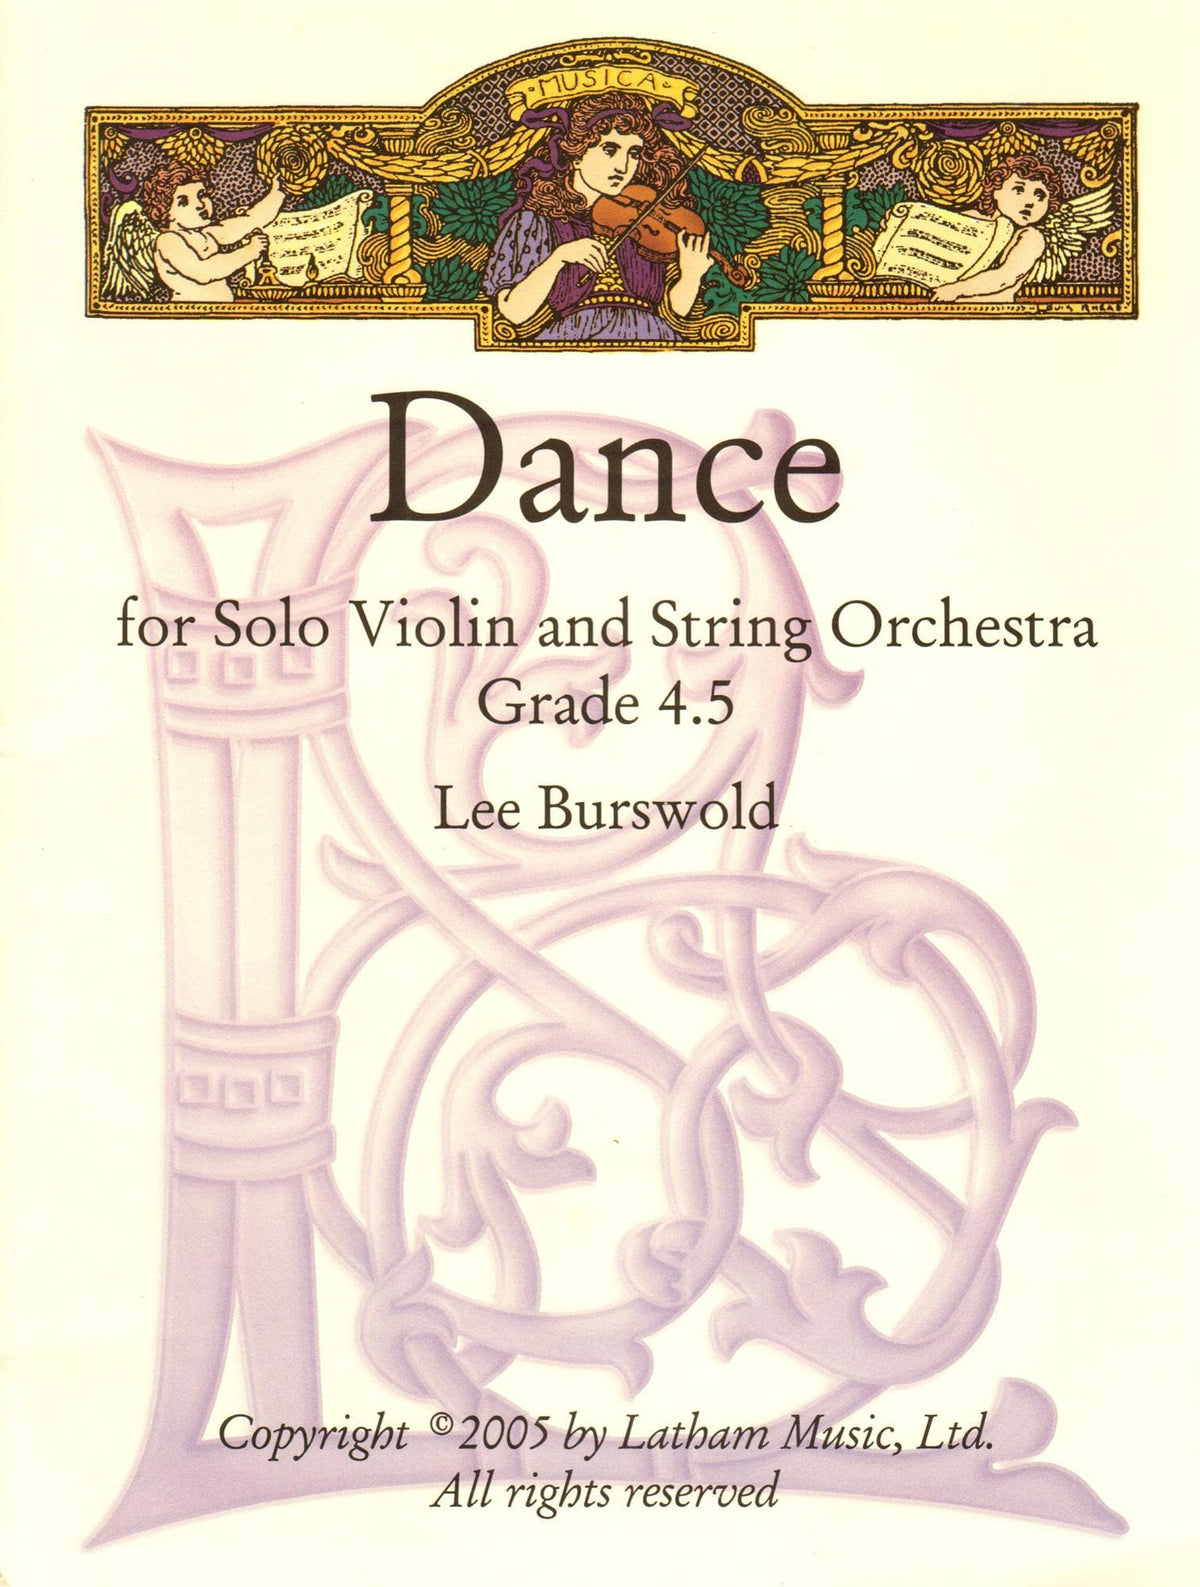 Burswold, Lee - Dance for Solo Violin and String Orchestra - Latham Music